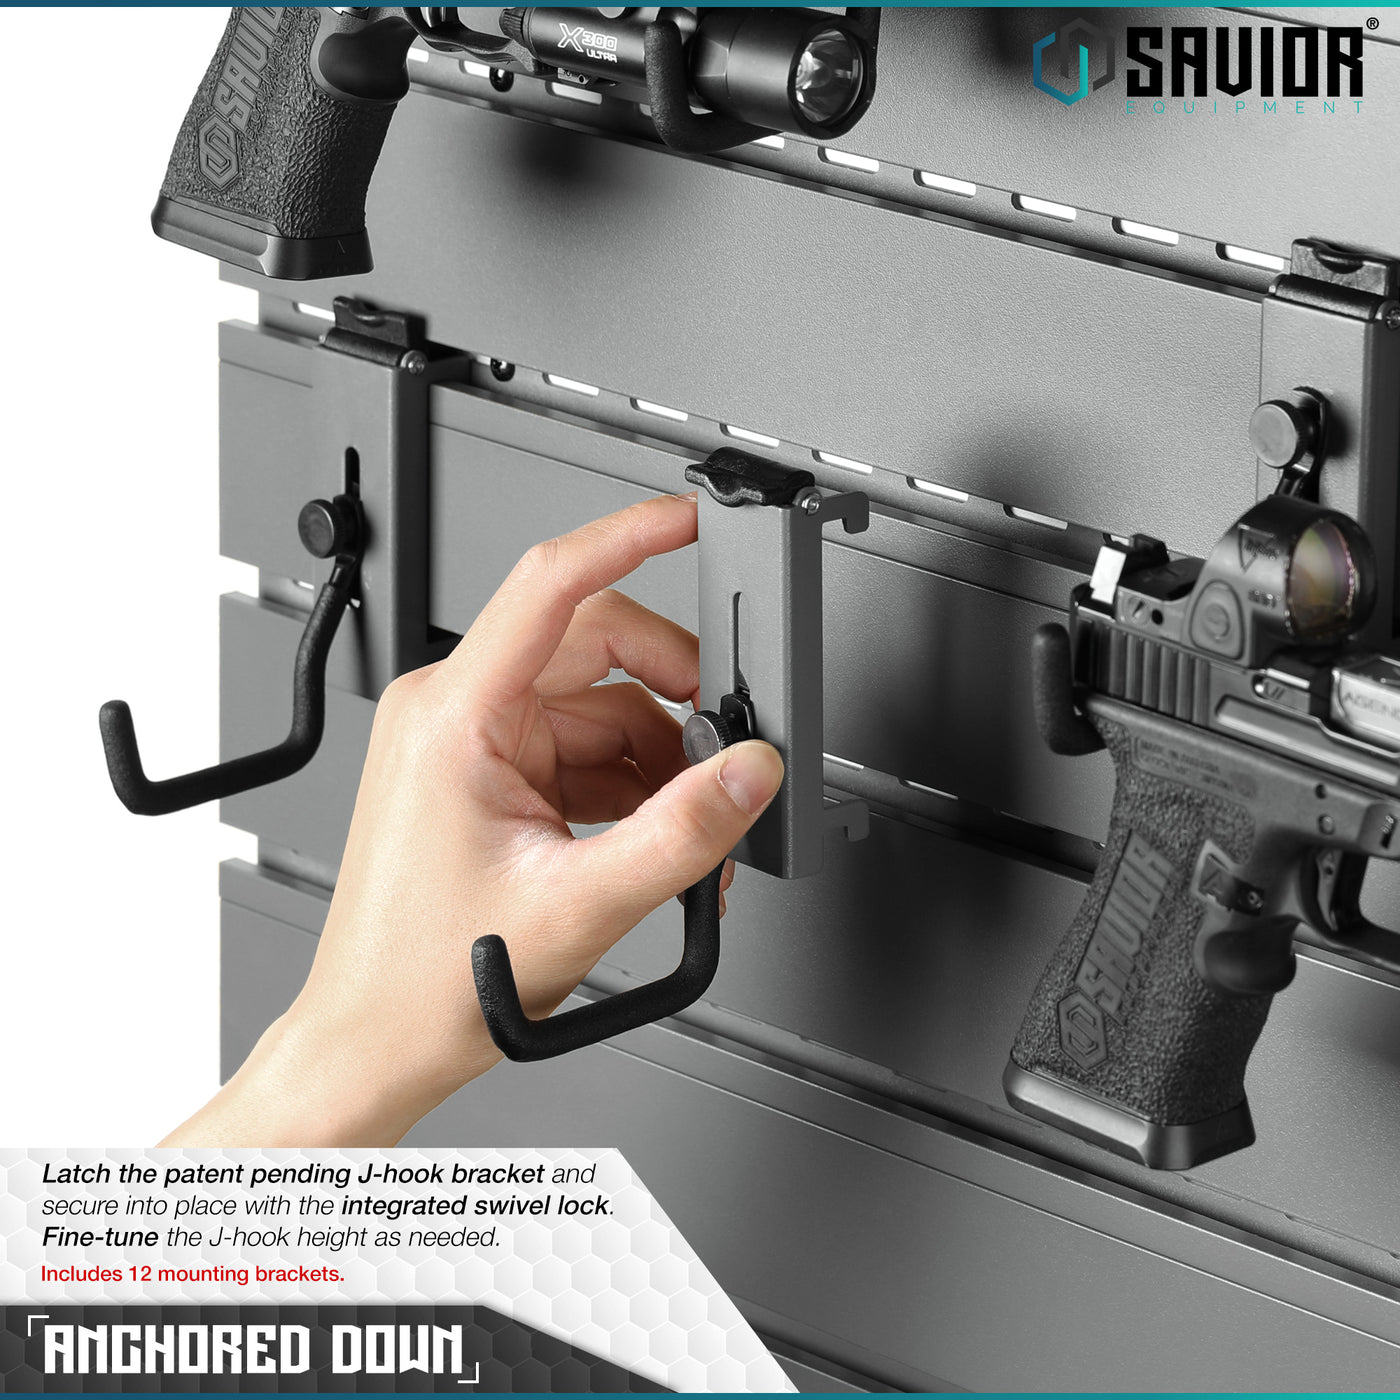 Anchored Down - Latch the patent pending J-hook bracket and secure into place with the integrated swivel lock. Fine-tune the J-hook height as needed. Includes 6 or 12 mounting brackets.